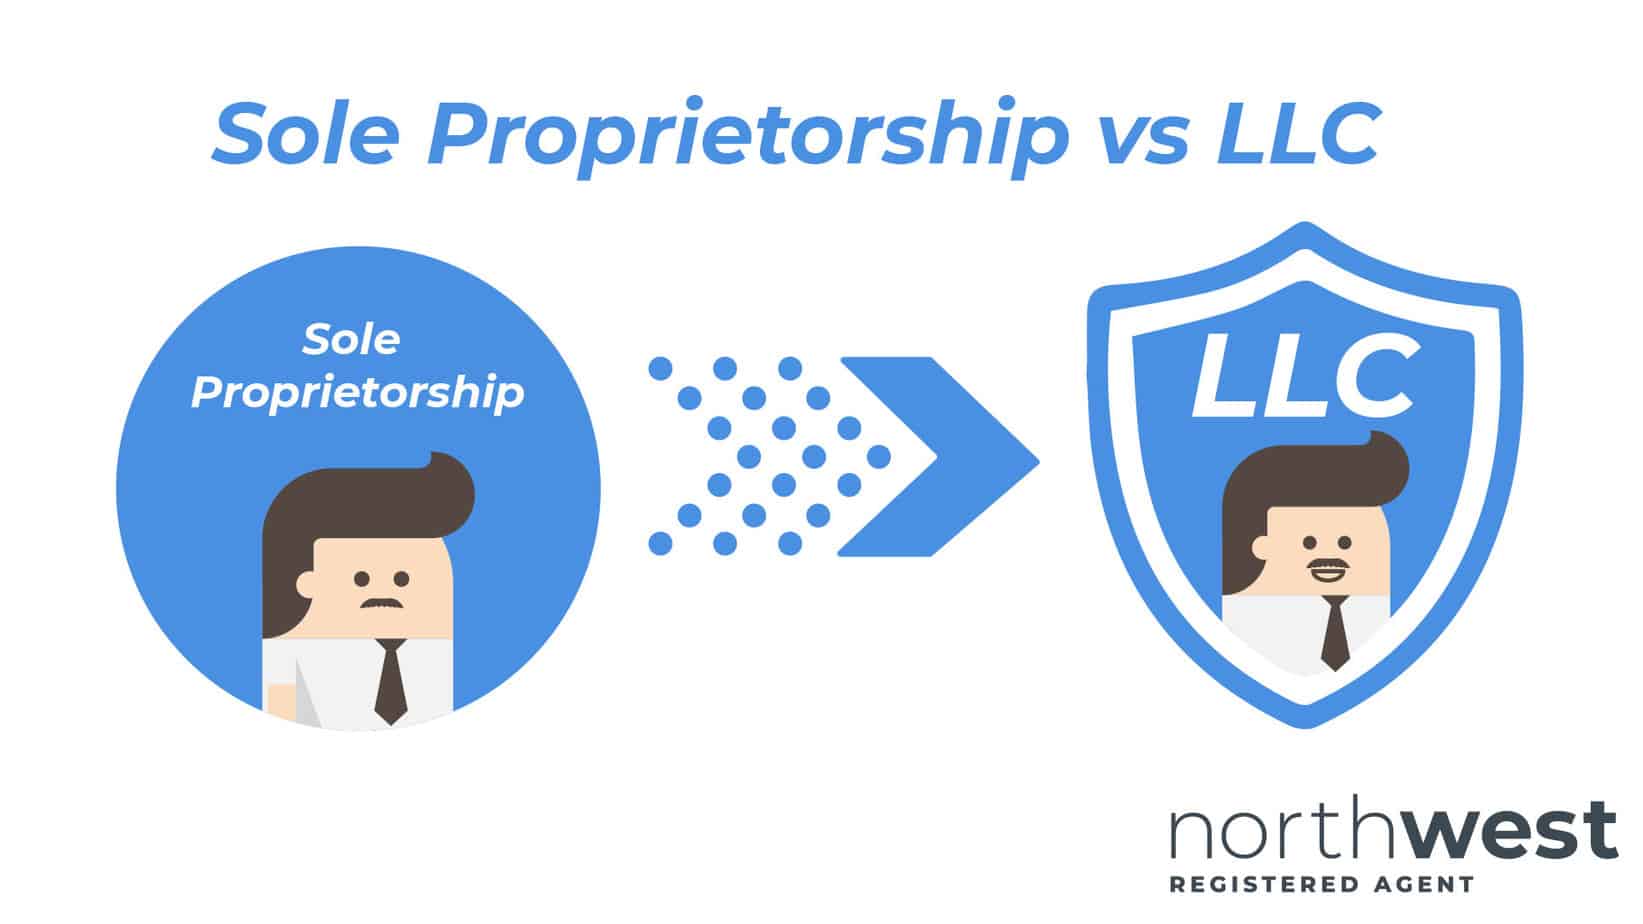 Why You Should Turn Your Sole Proprietorship into an LLC